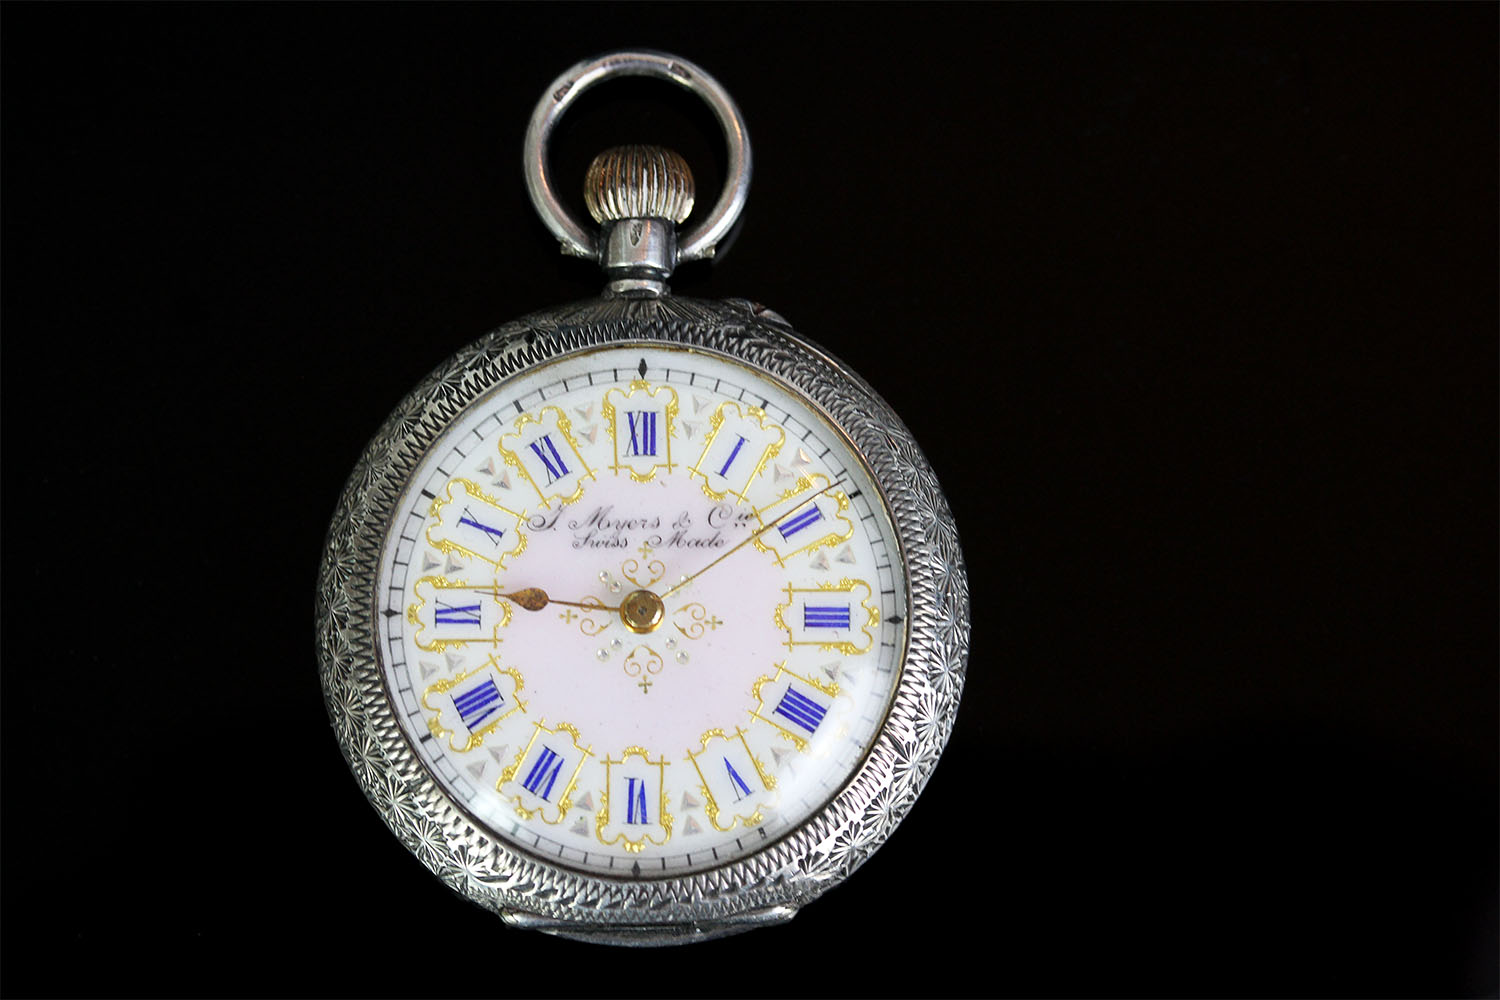 SILVER OPEN POCKET WATCH MADE BY L. MYERS AND CO, SWISS MADE,round, white dial with gold hands, blue